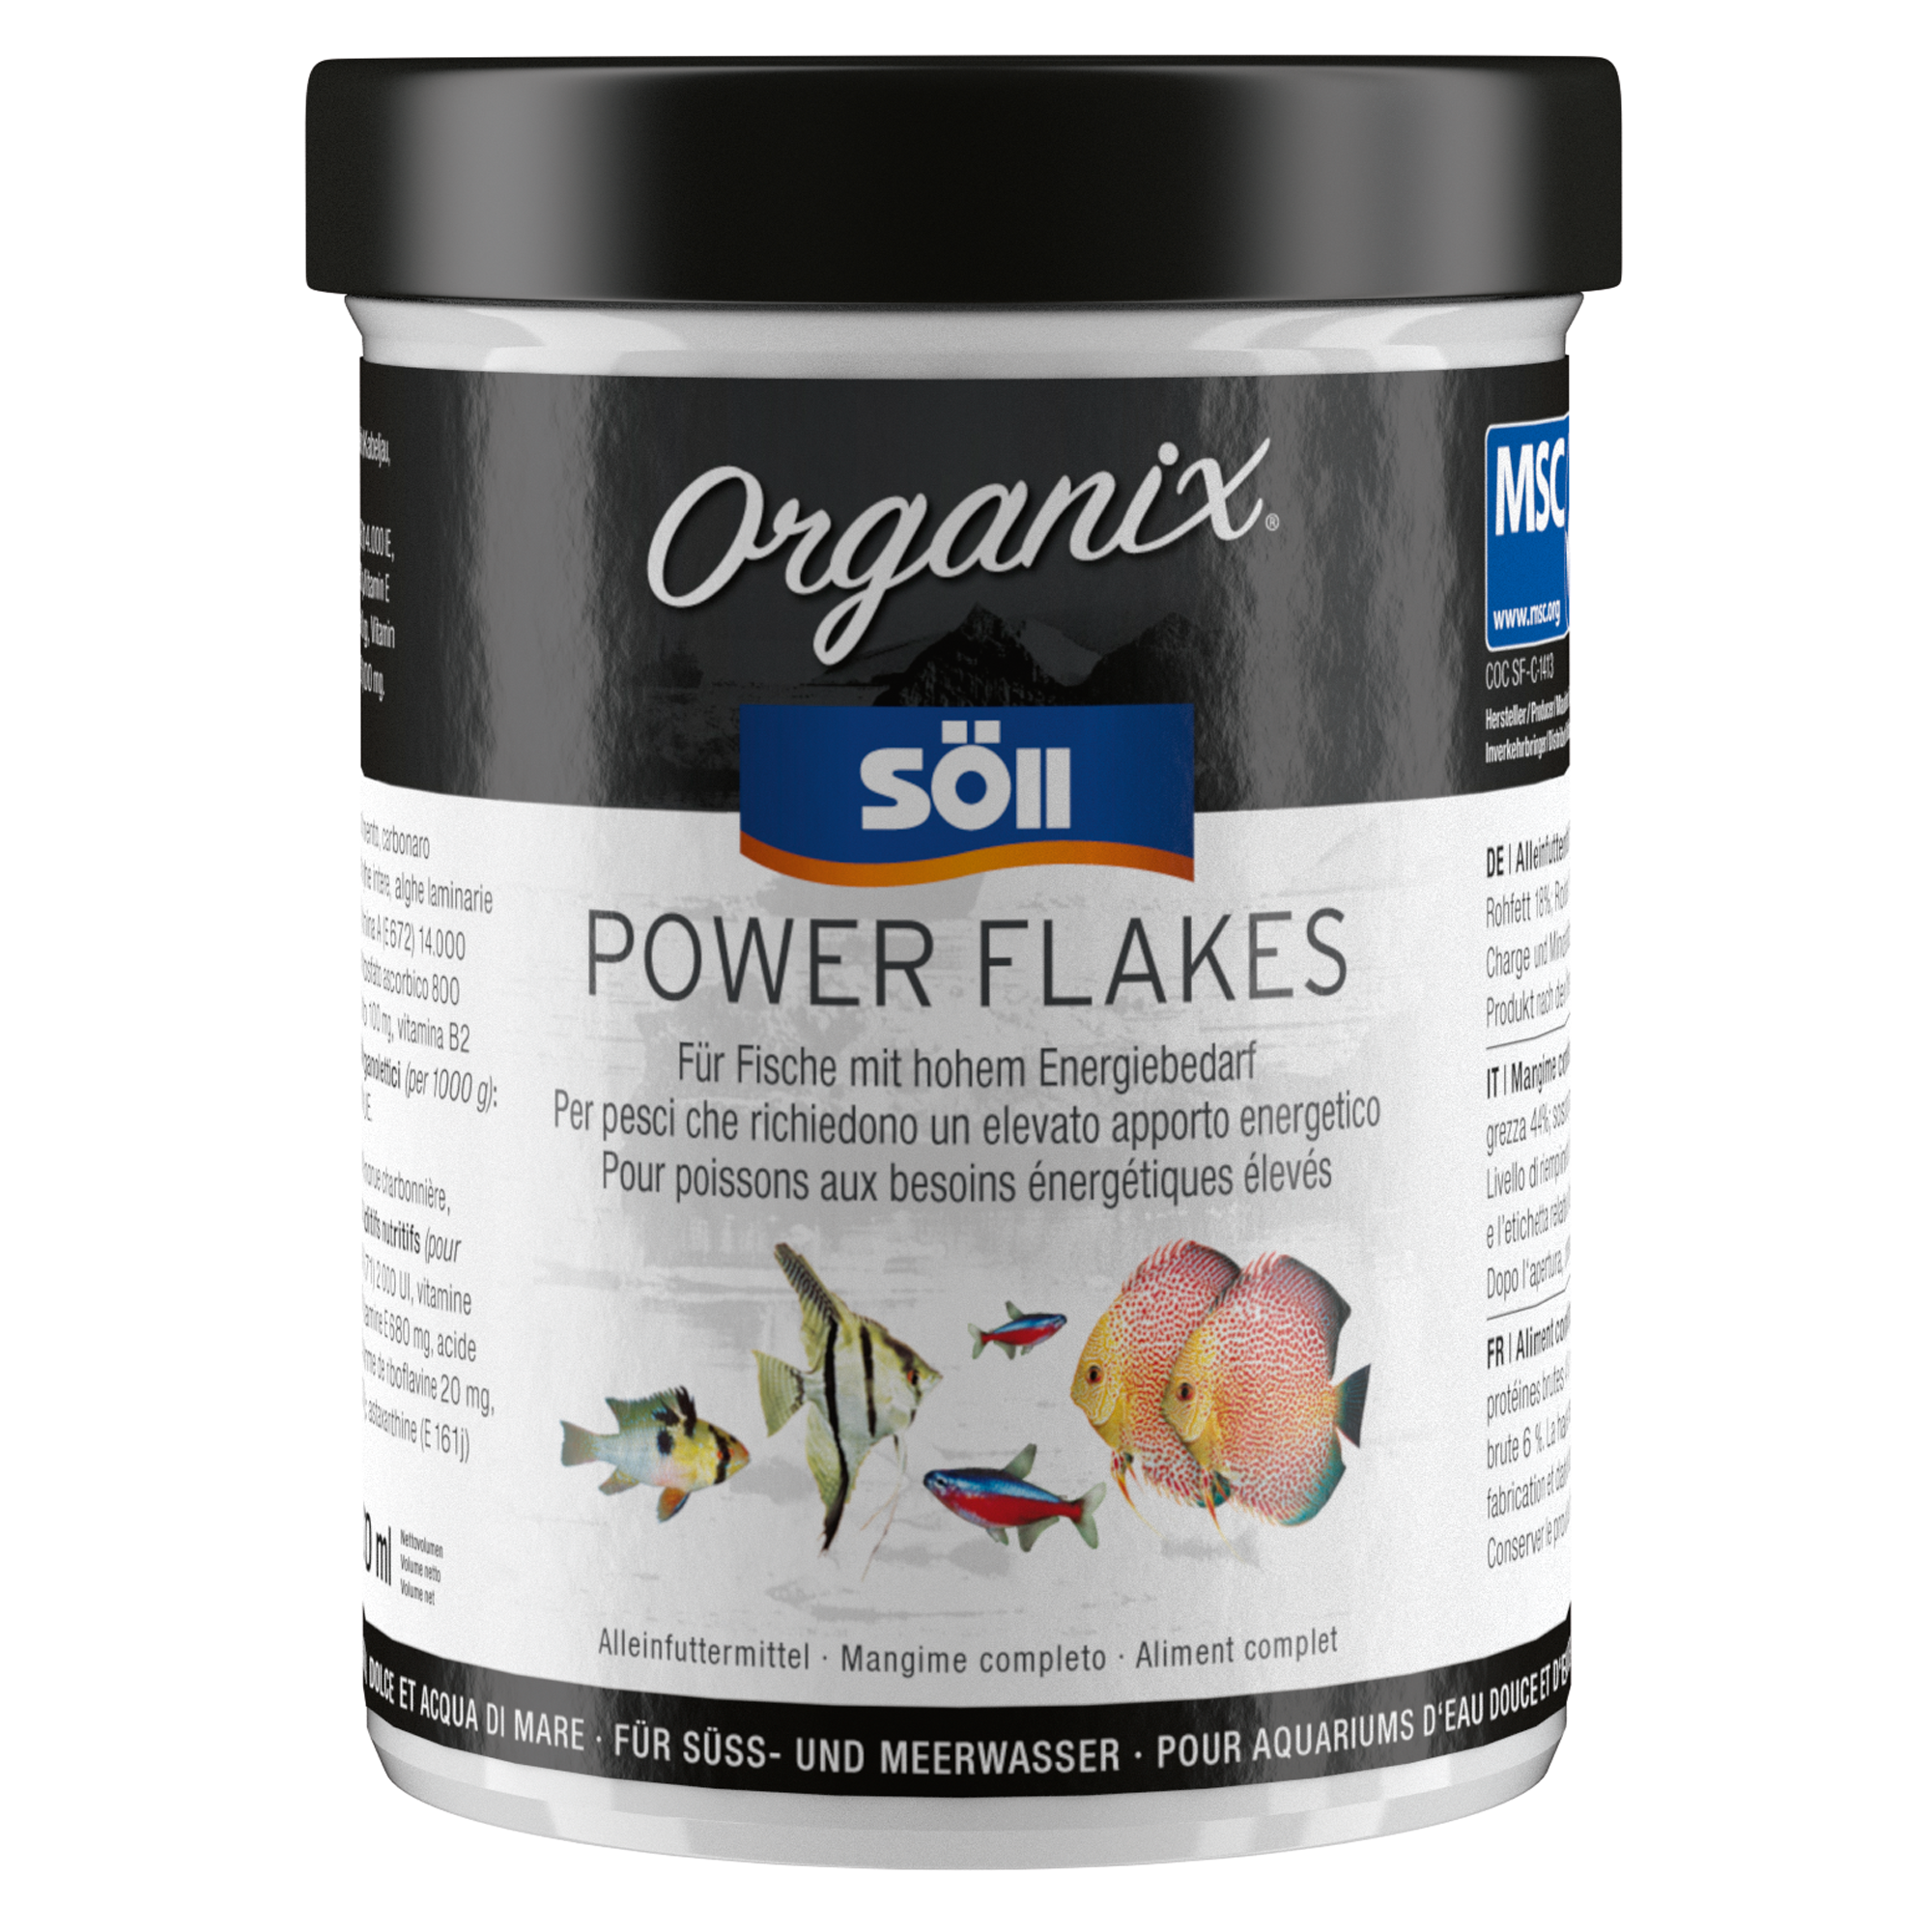 Organix Power Flakes 270 ml + product picture